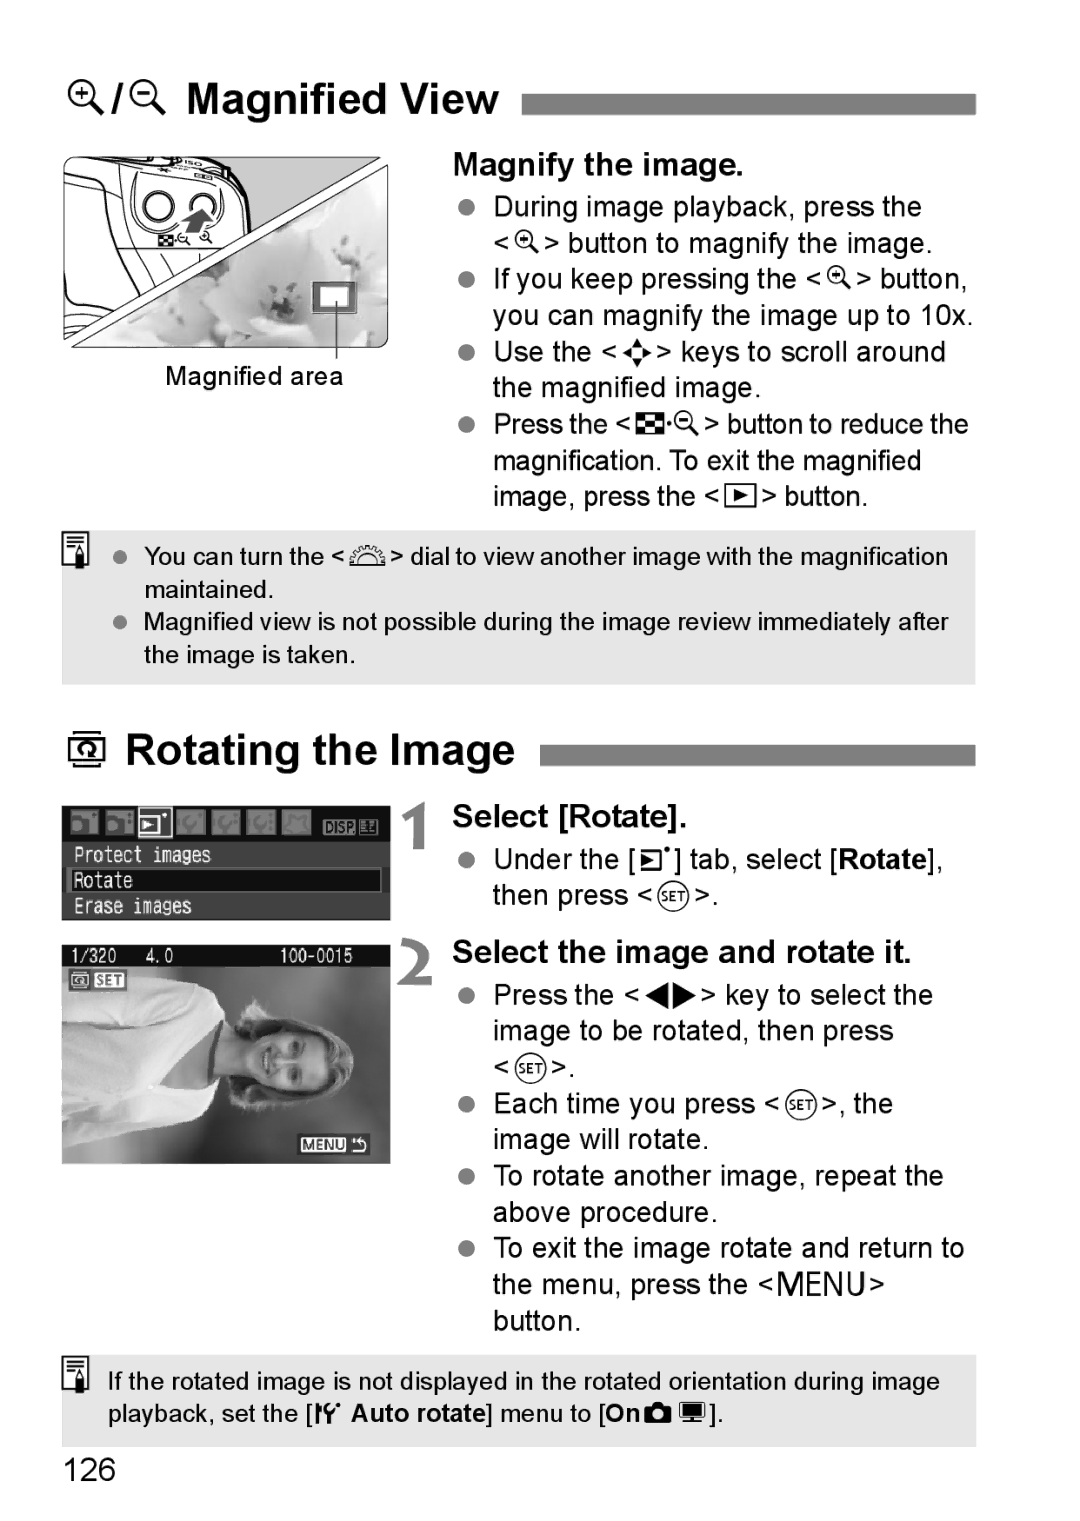 Canon EOS 450D instruction manual YMagnified View, BRotating the Image, Select Rotate, Select the image and rotate it, 126 